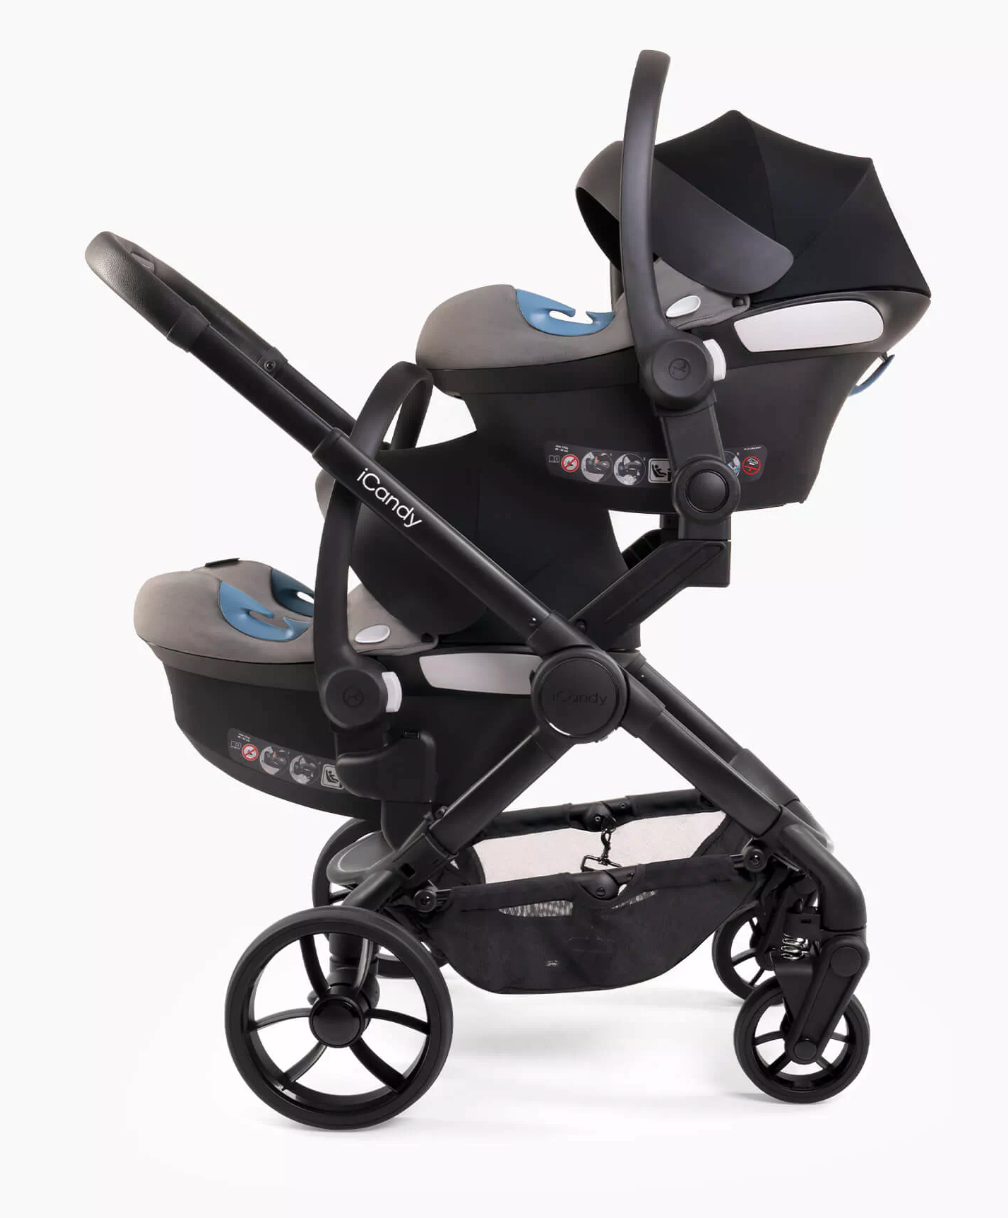 iCandy Peach 7 Twin Pushchair - Cookie